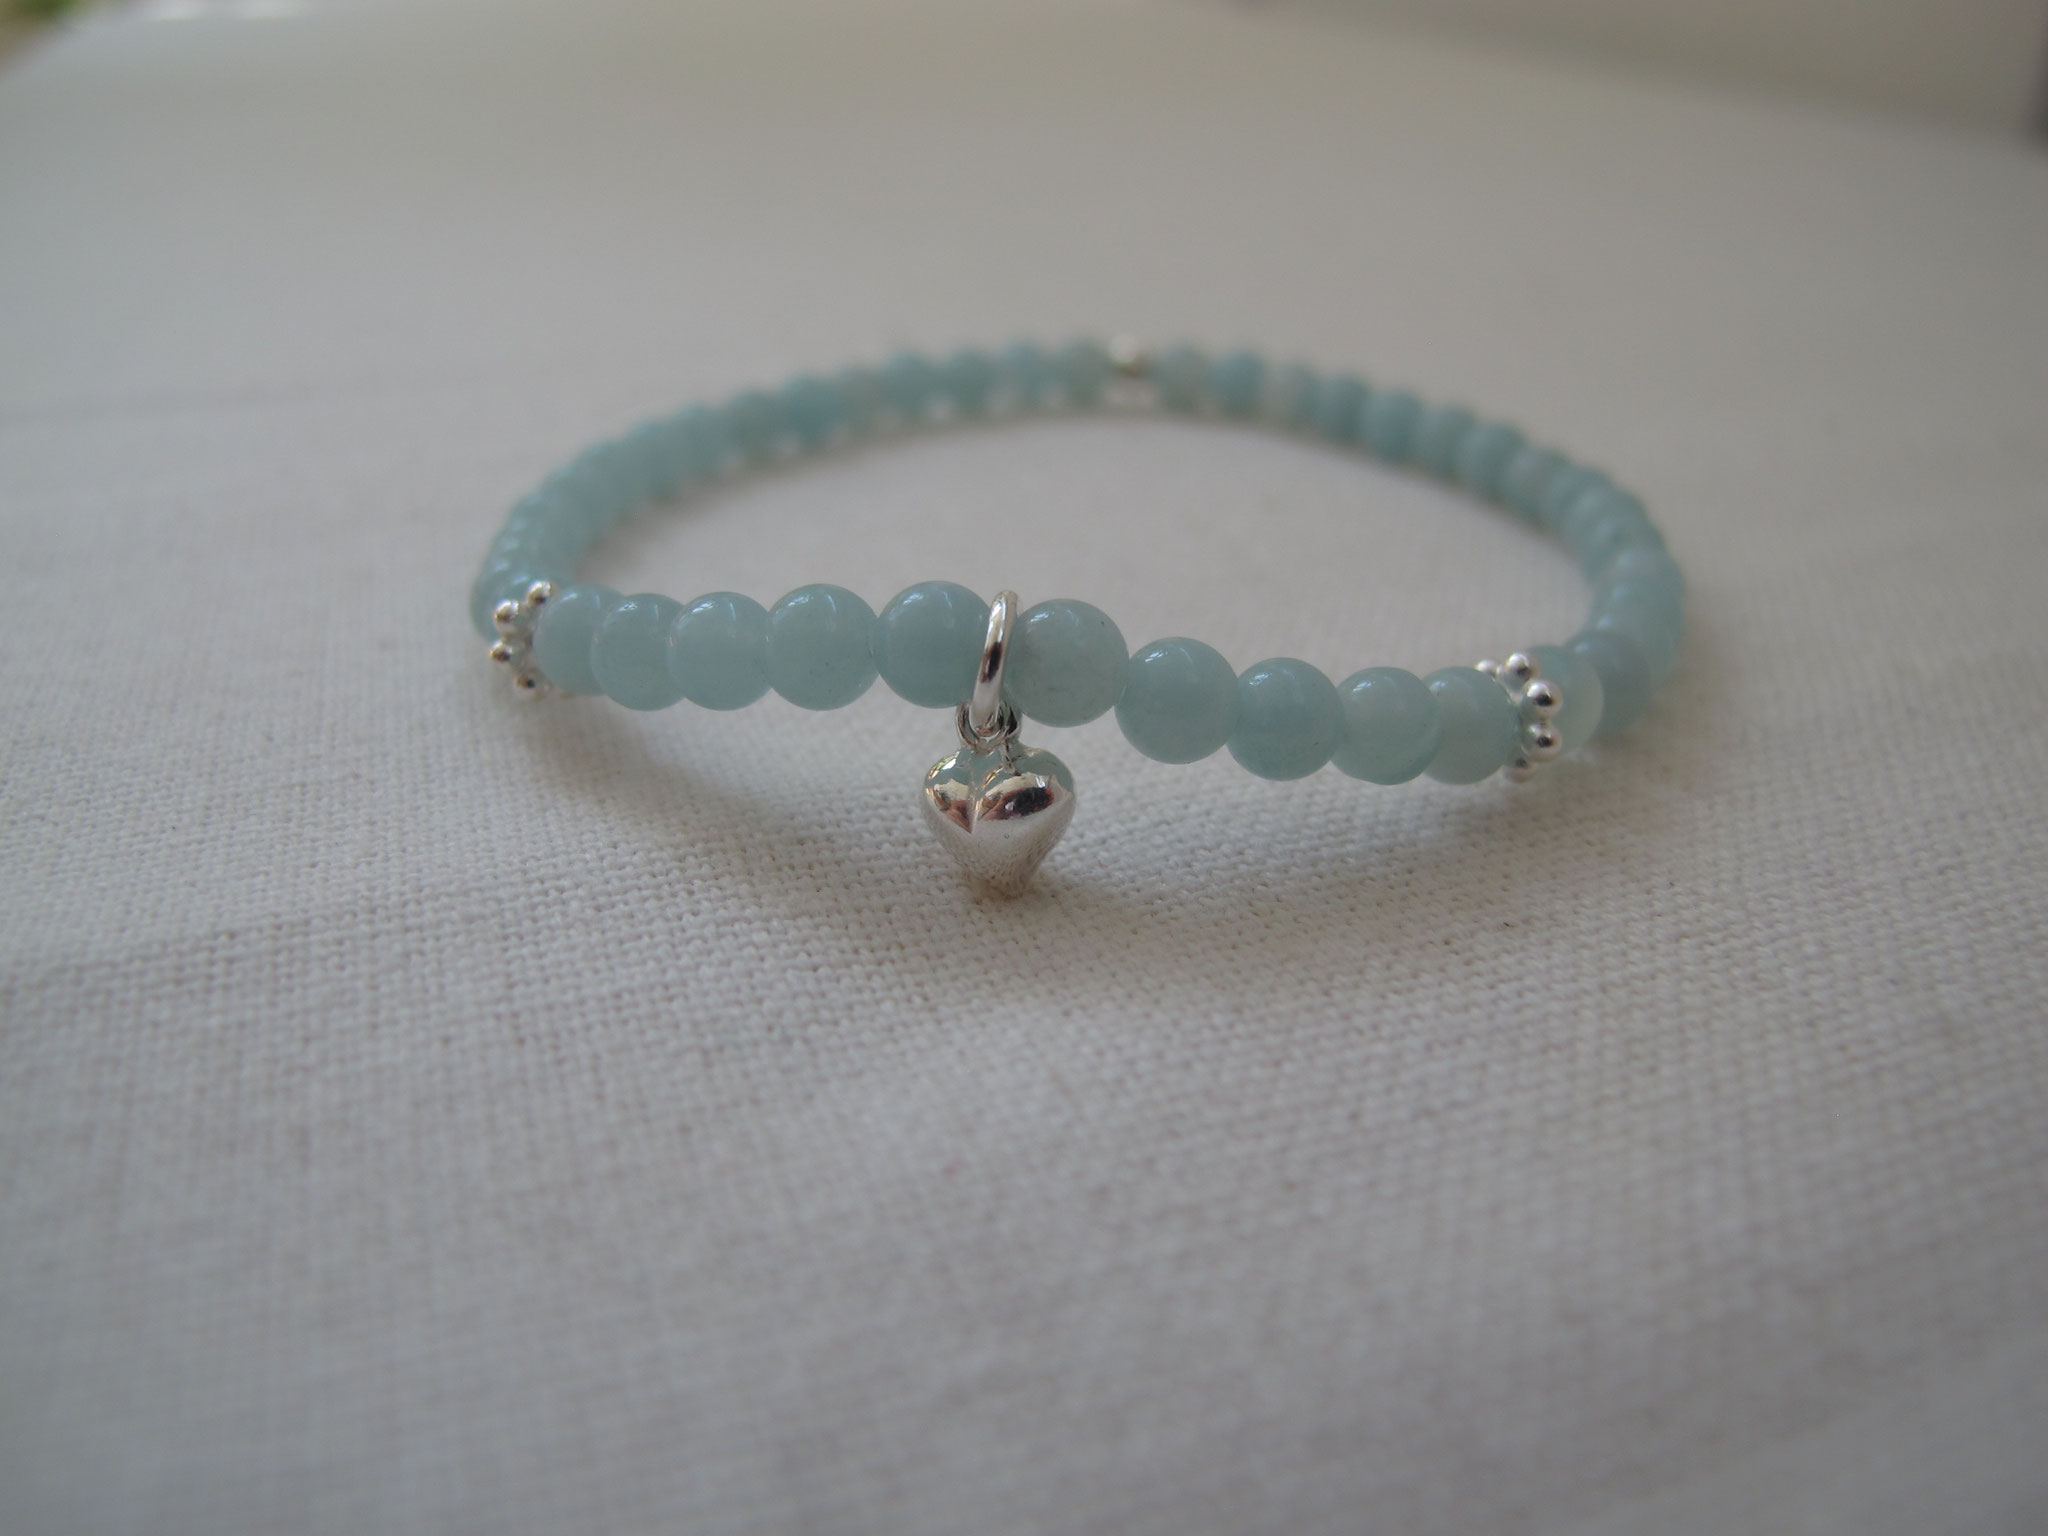 Lovely amazonite with 925 Sterlin silver heart charm (sold)